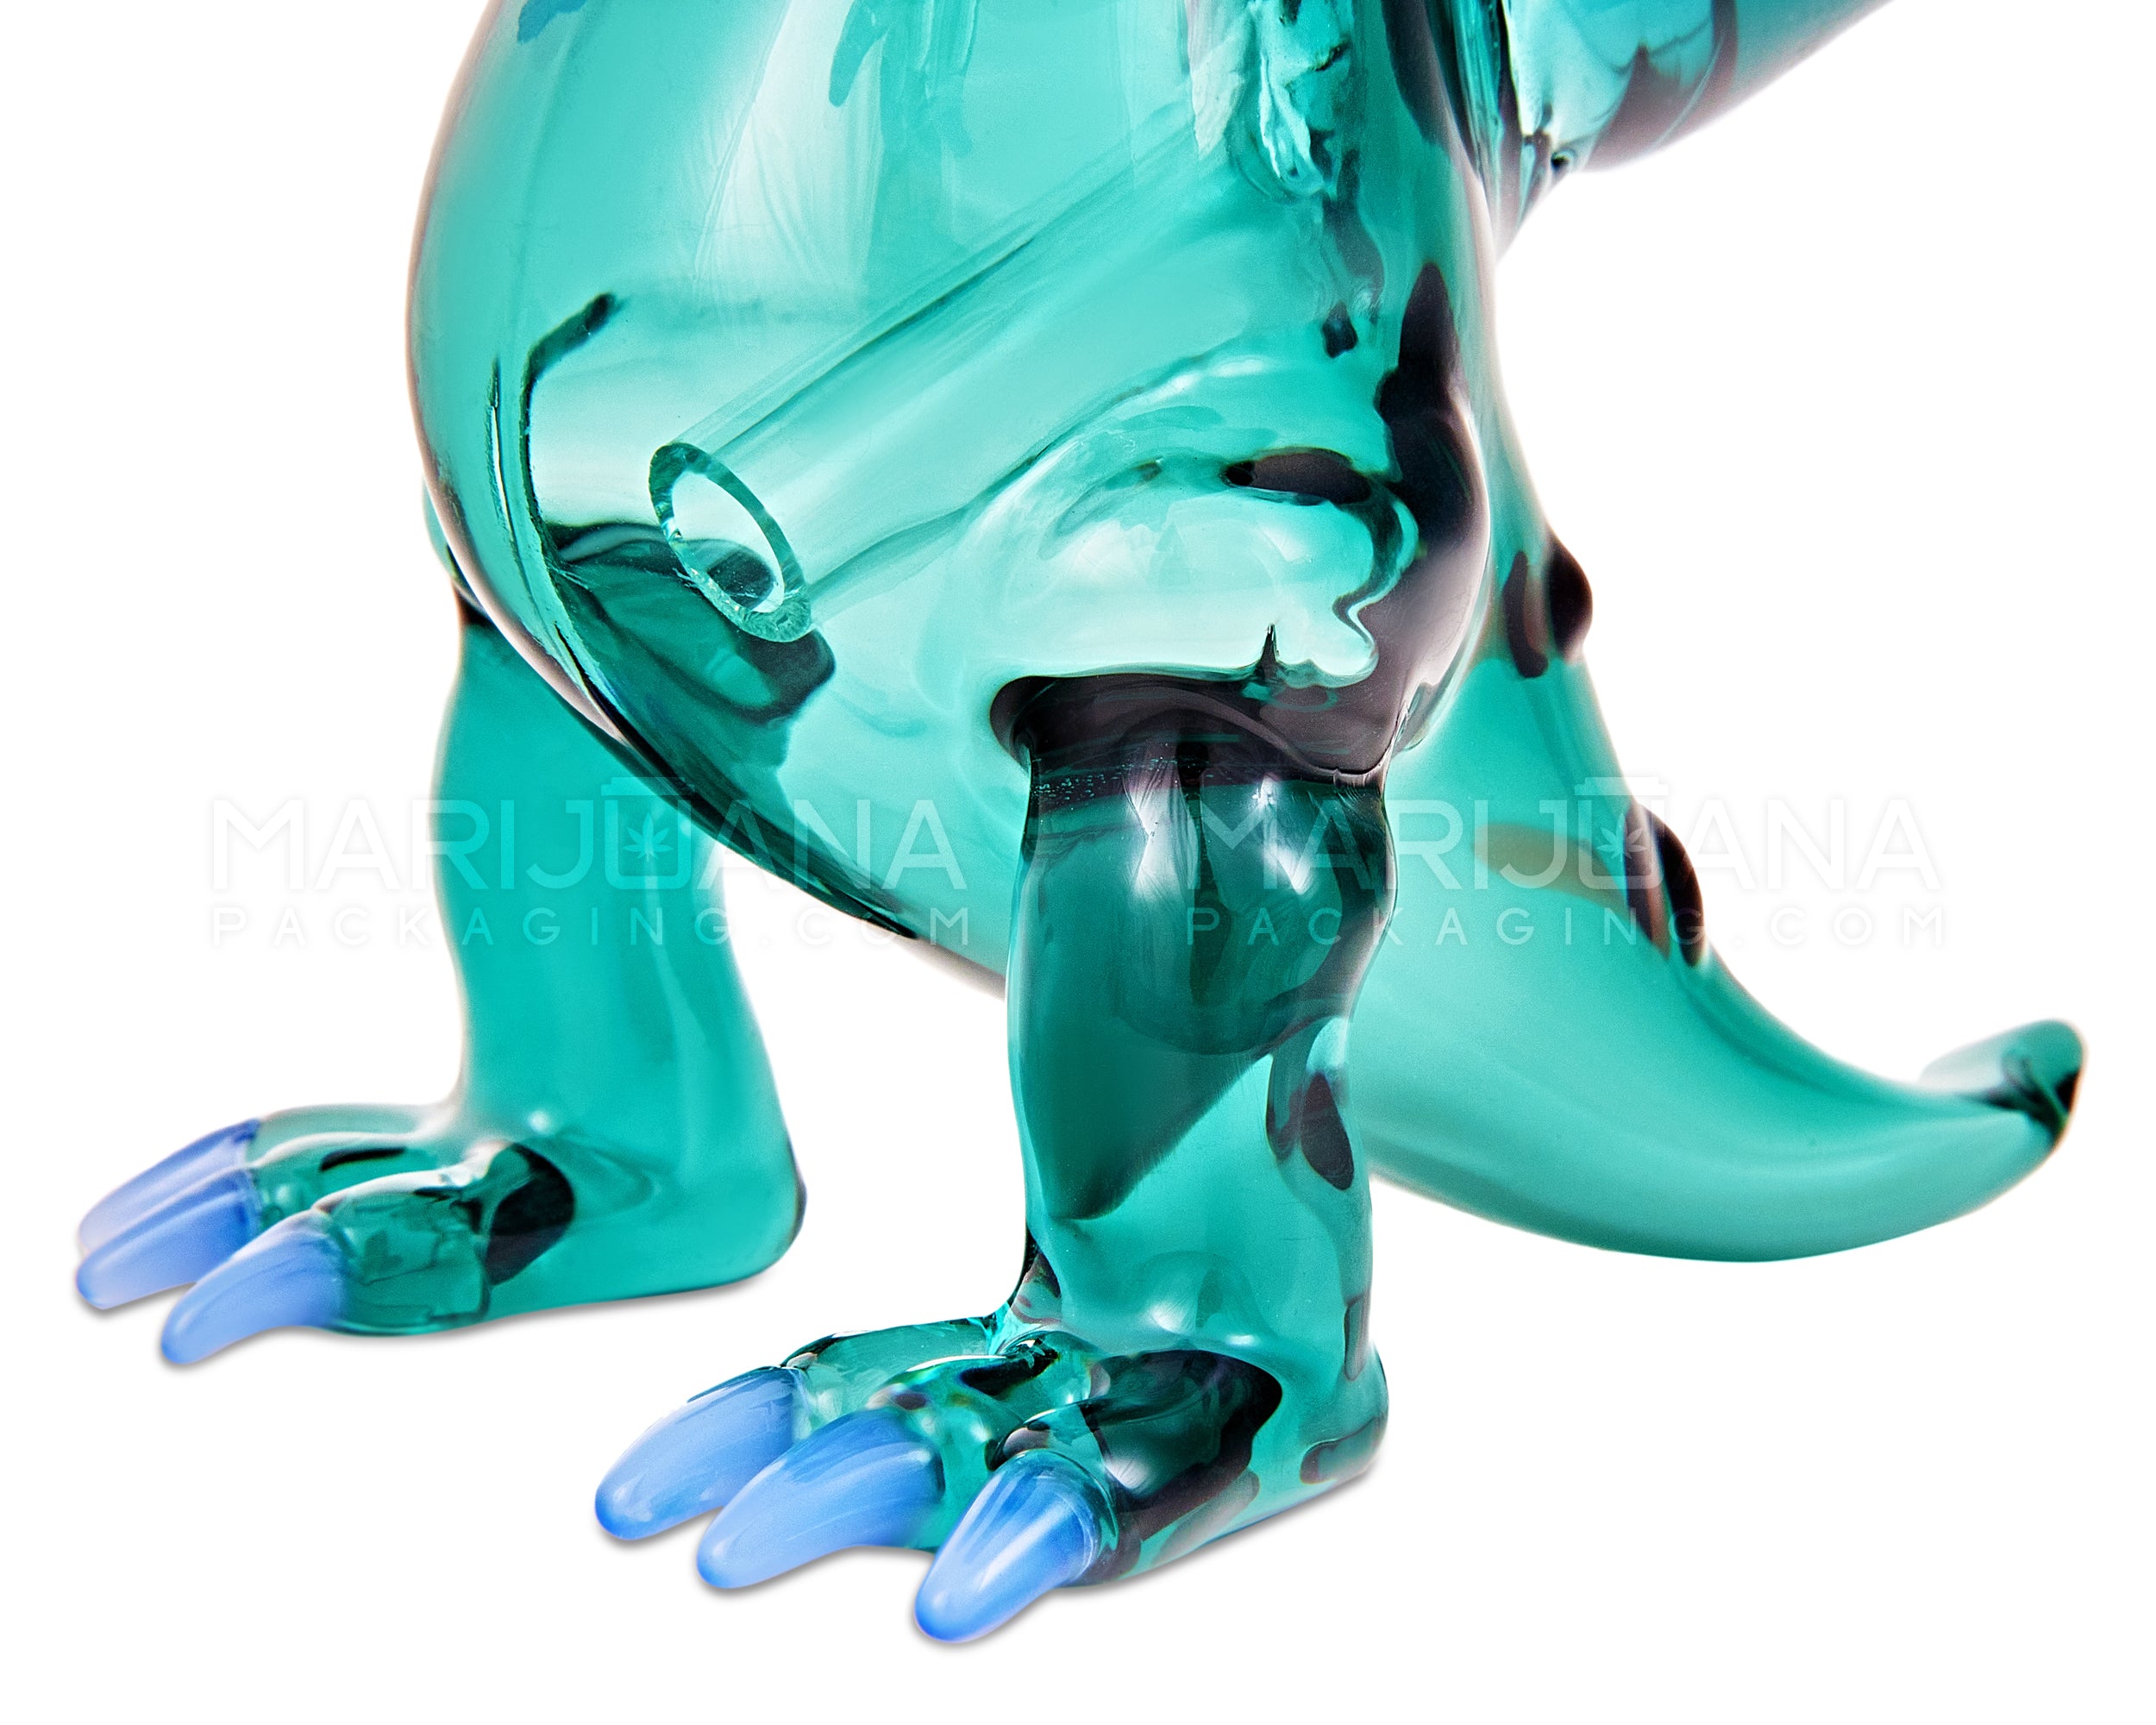 Heady | USA Glass Raptor Glass Dinosaur Water Pipe | 6in Tall - 14mm Bowl - Teal - 5